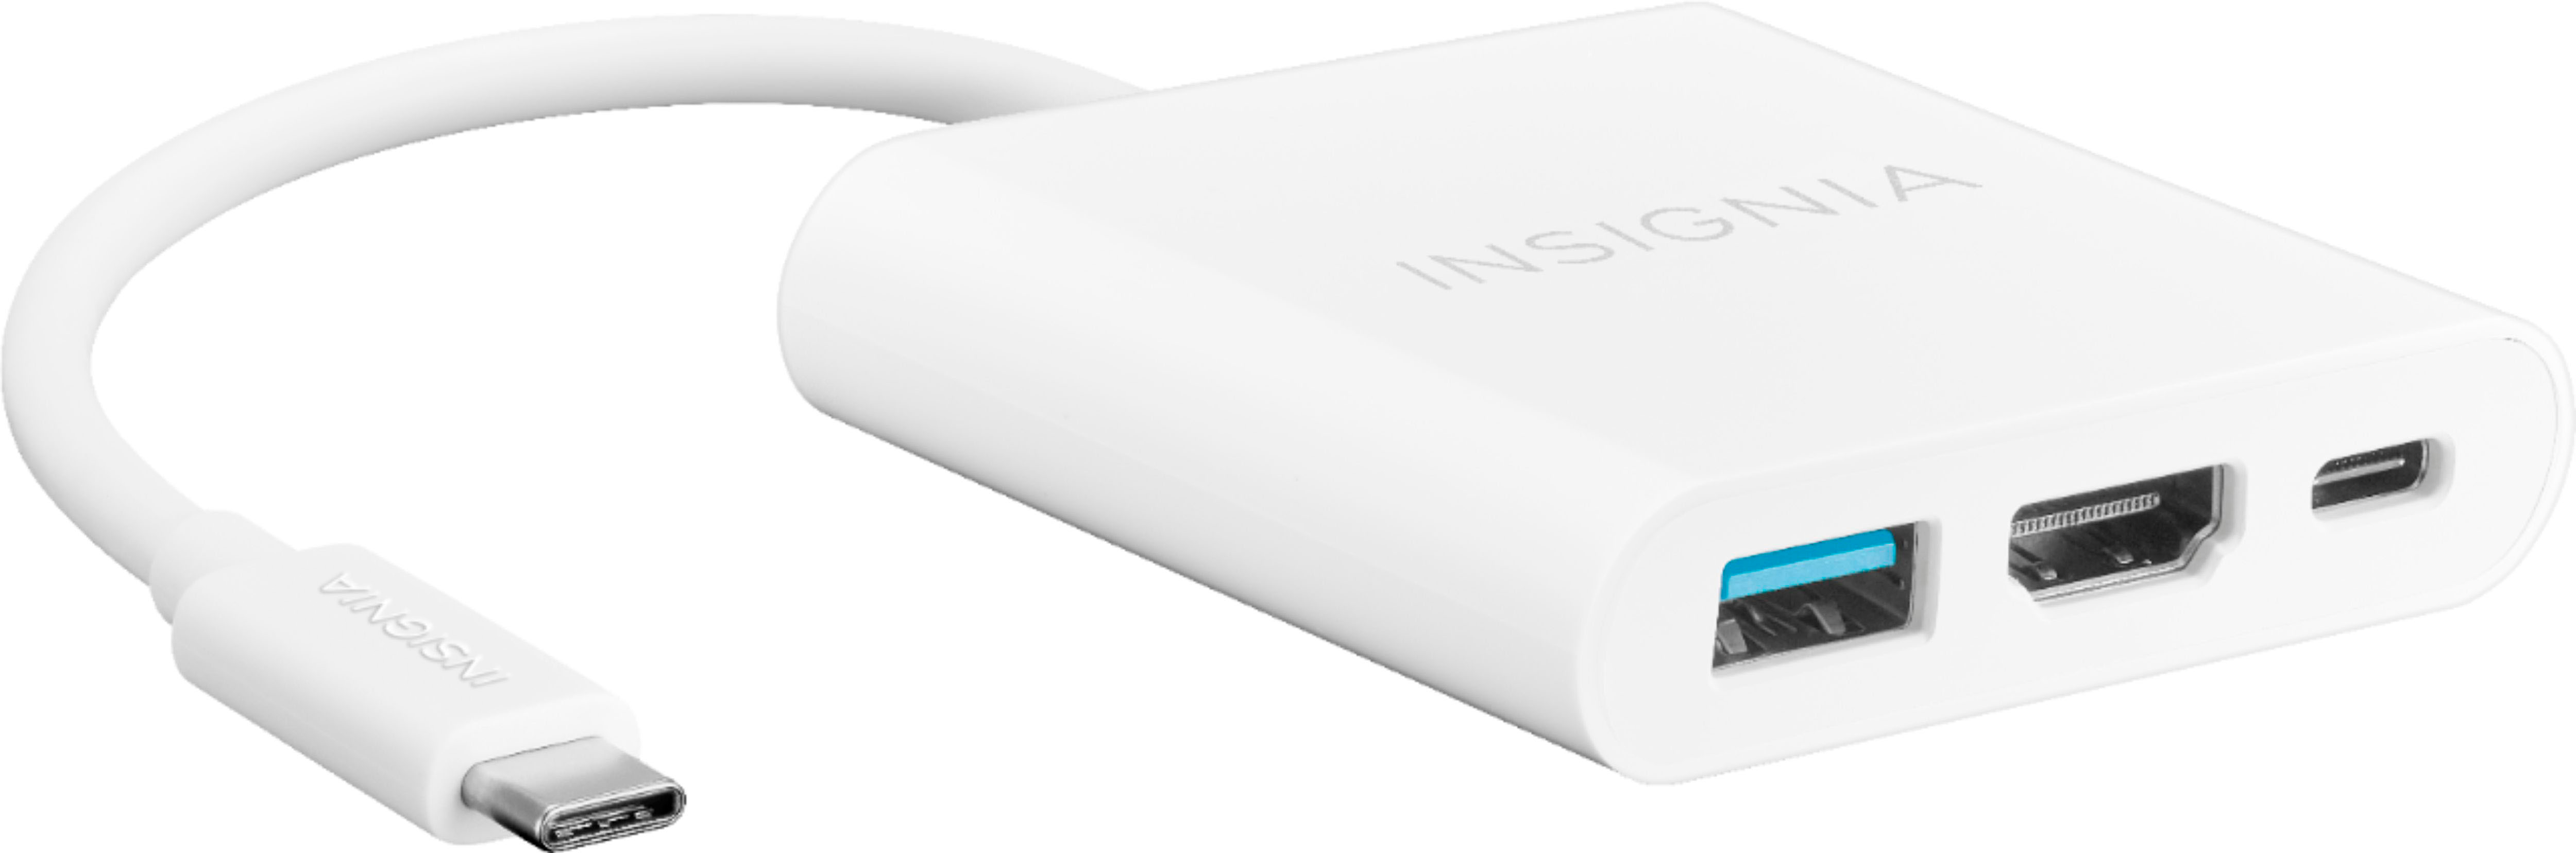 Insignia™ VGA to HDMI Adapter White NS-PCAVH - Best Buy